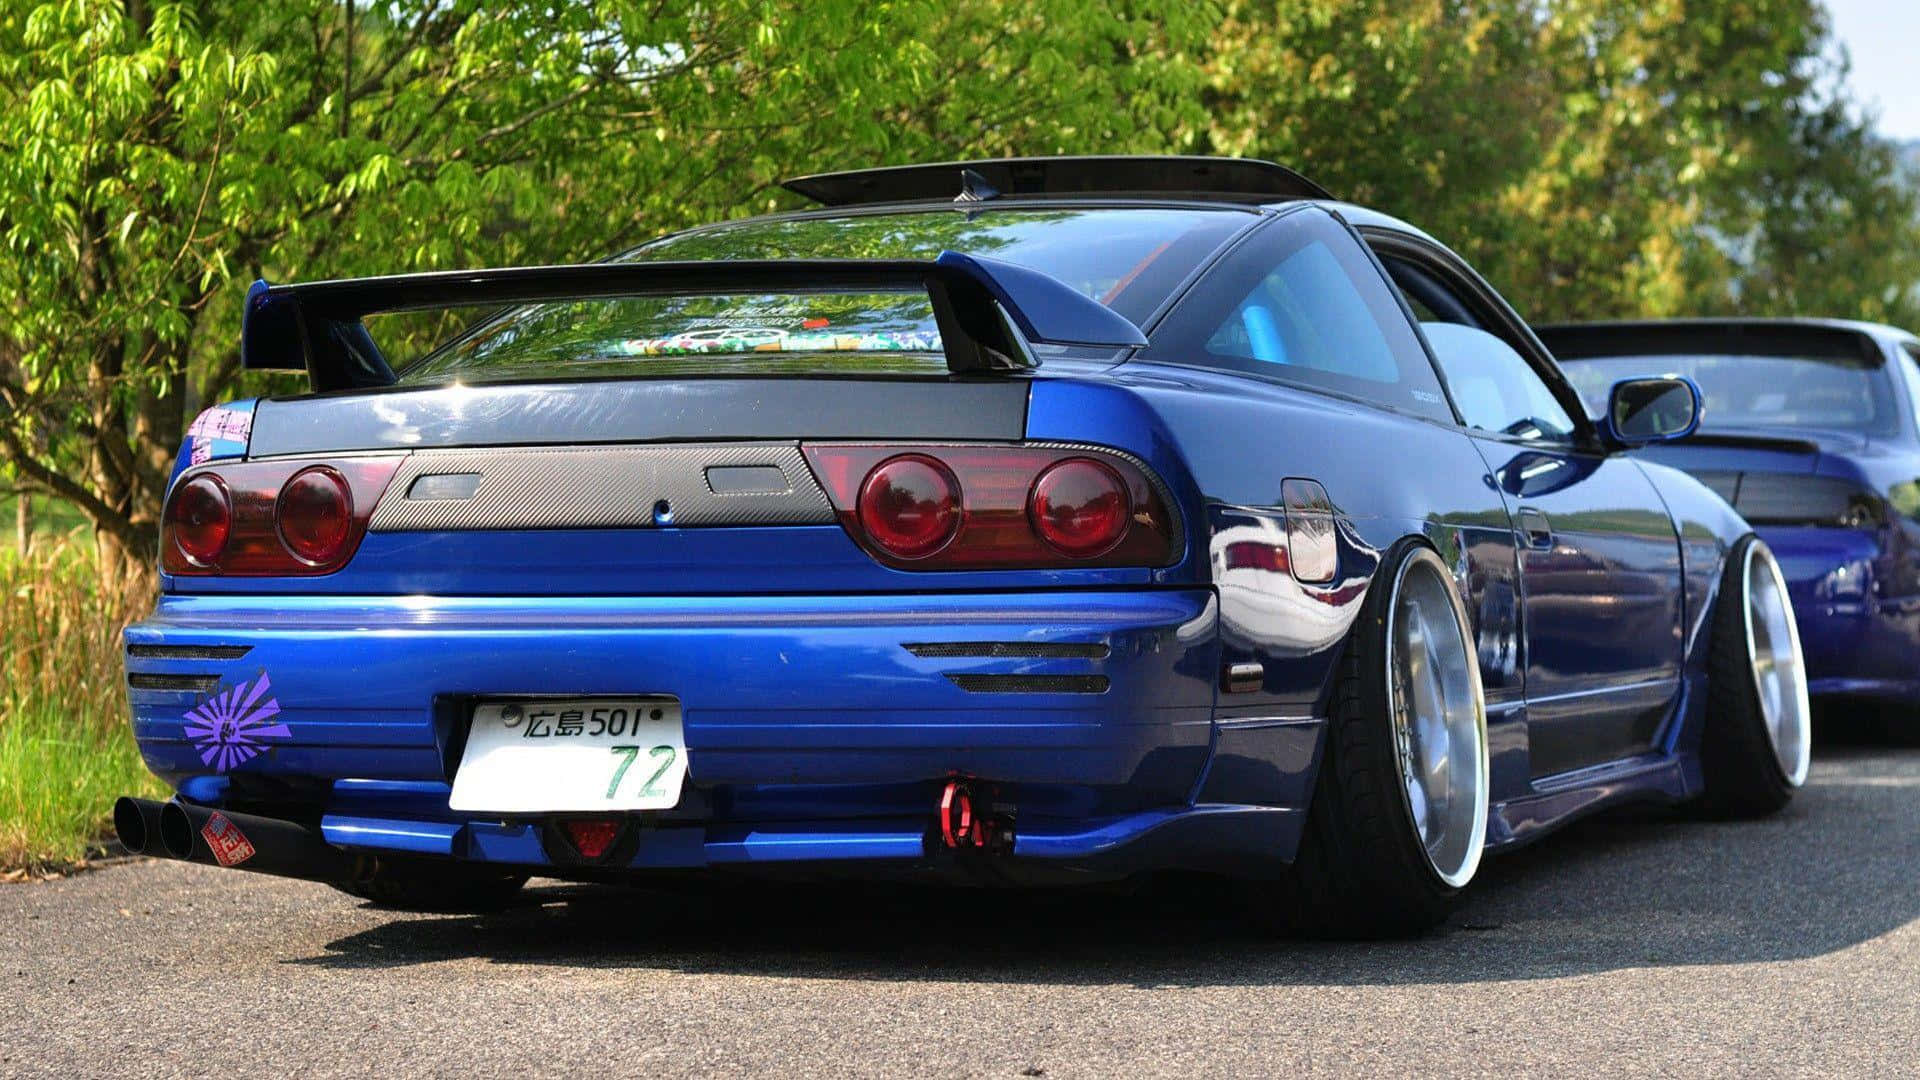 Get Ready for a Thrilling Ride with the Nissan 180sx Wallpaper